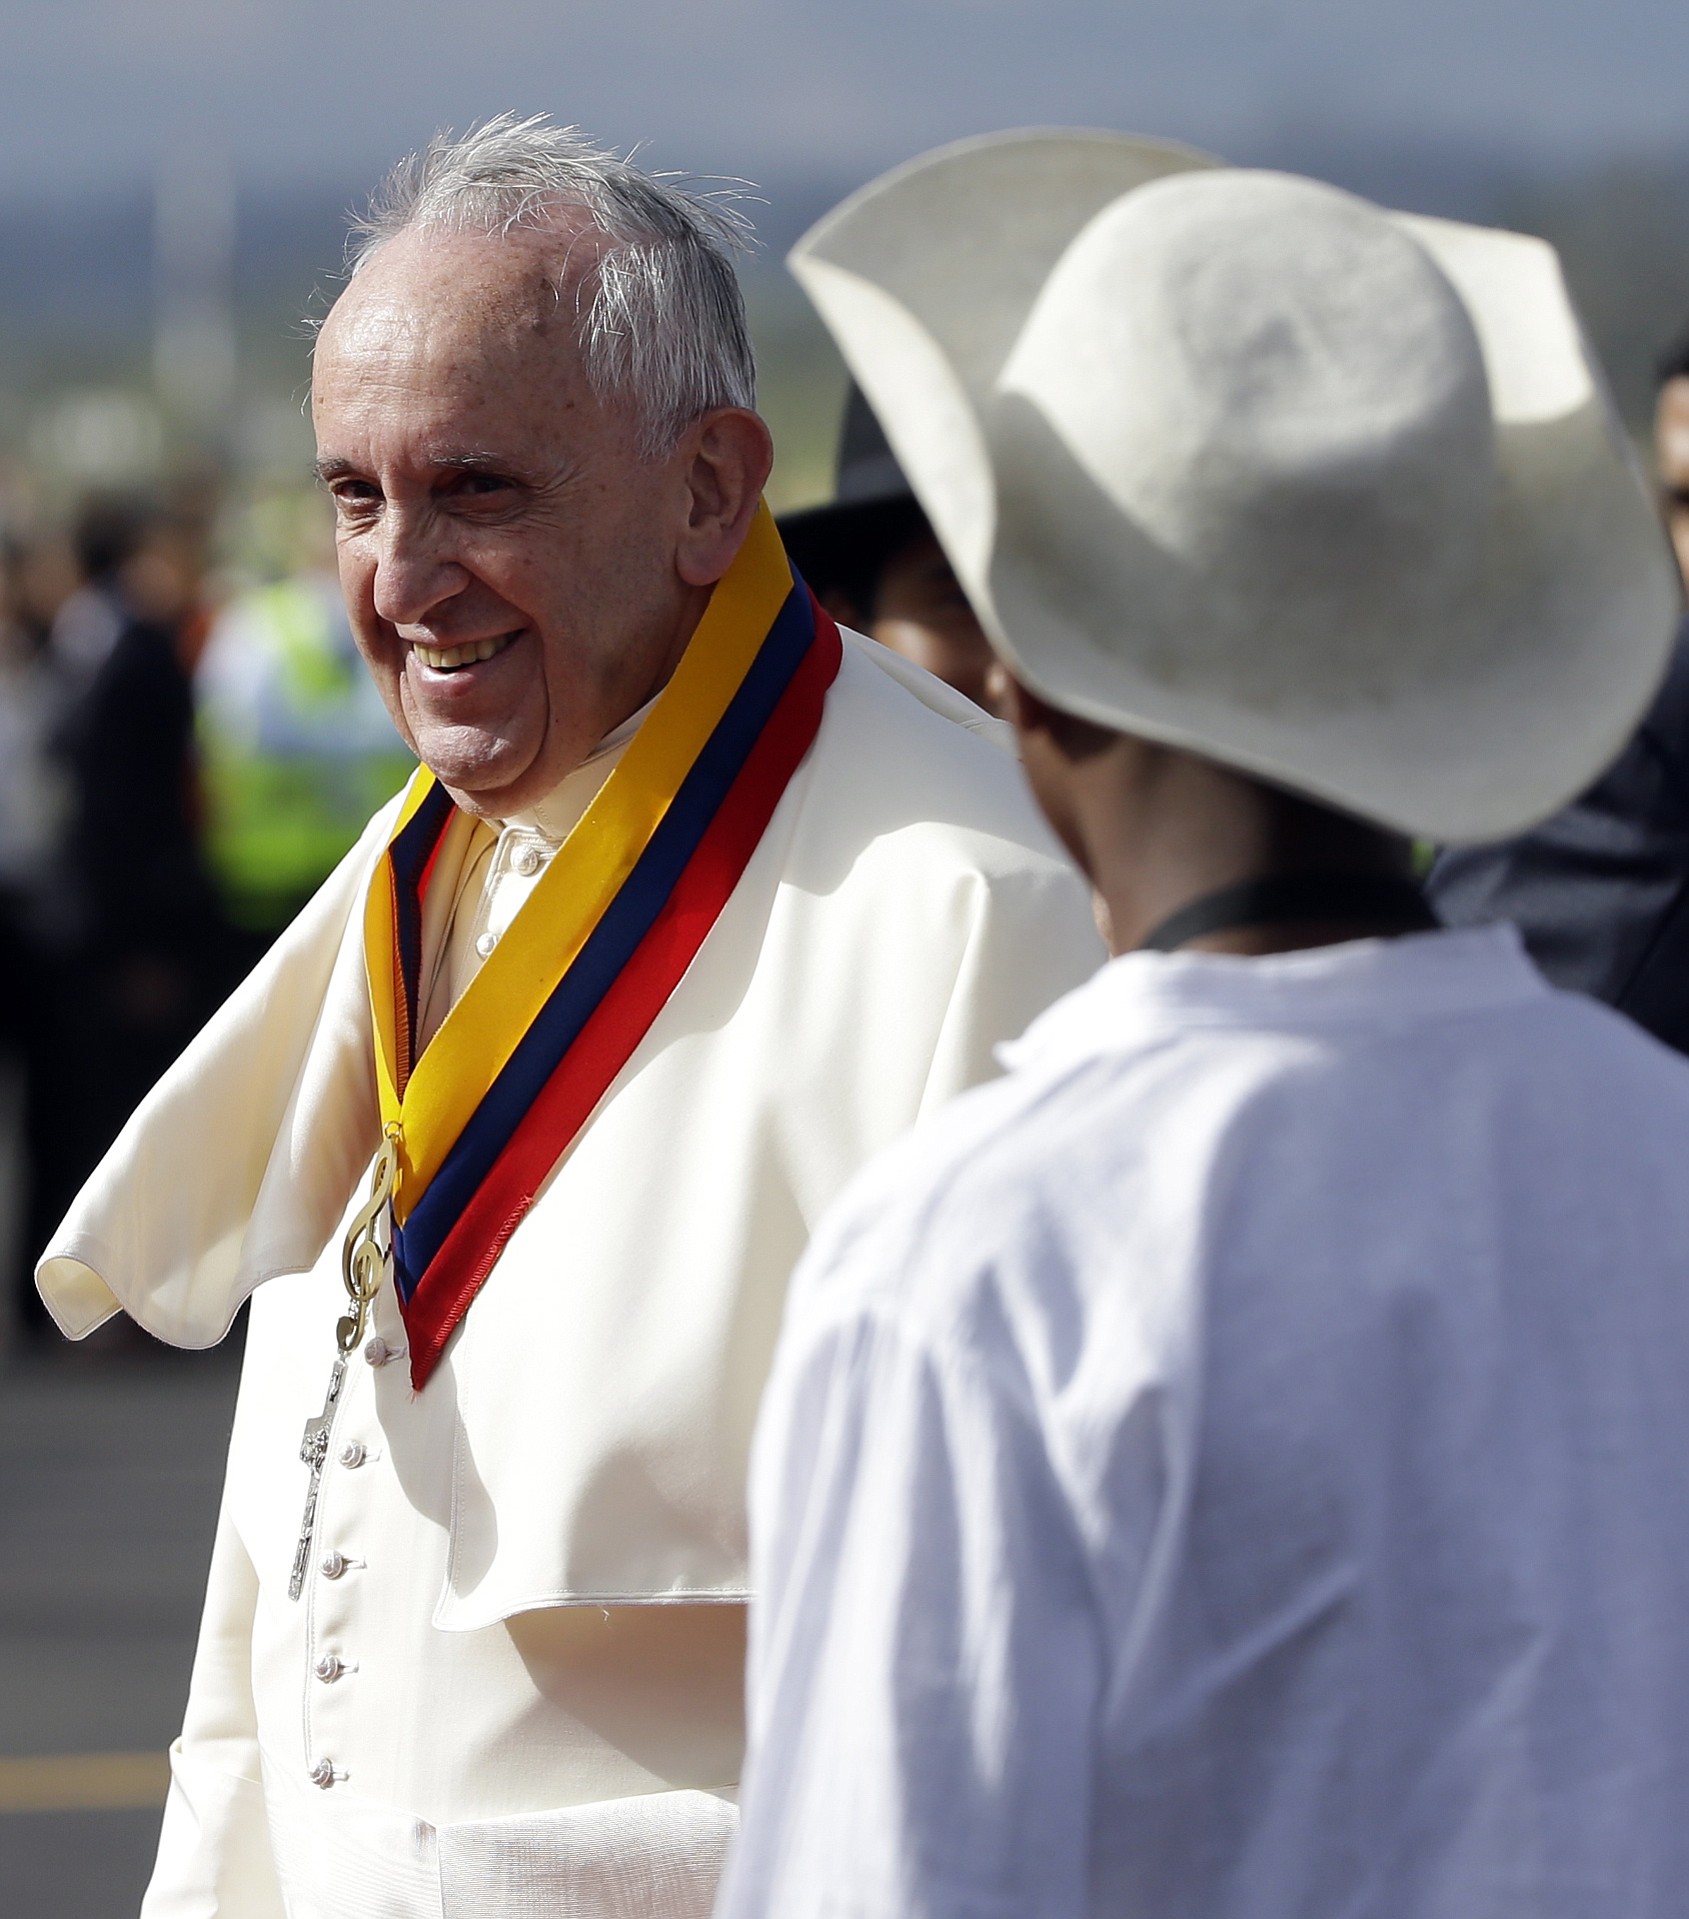 Pope Francis is welcomed by children in traditional costumes on his arrival Sunday to the Mariscal Sucre International Airport in Quito, Ecuador.